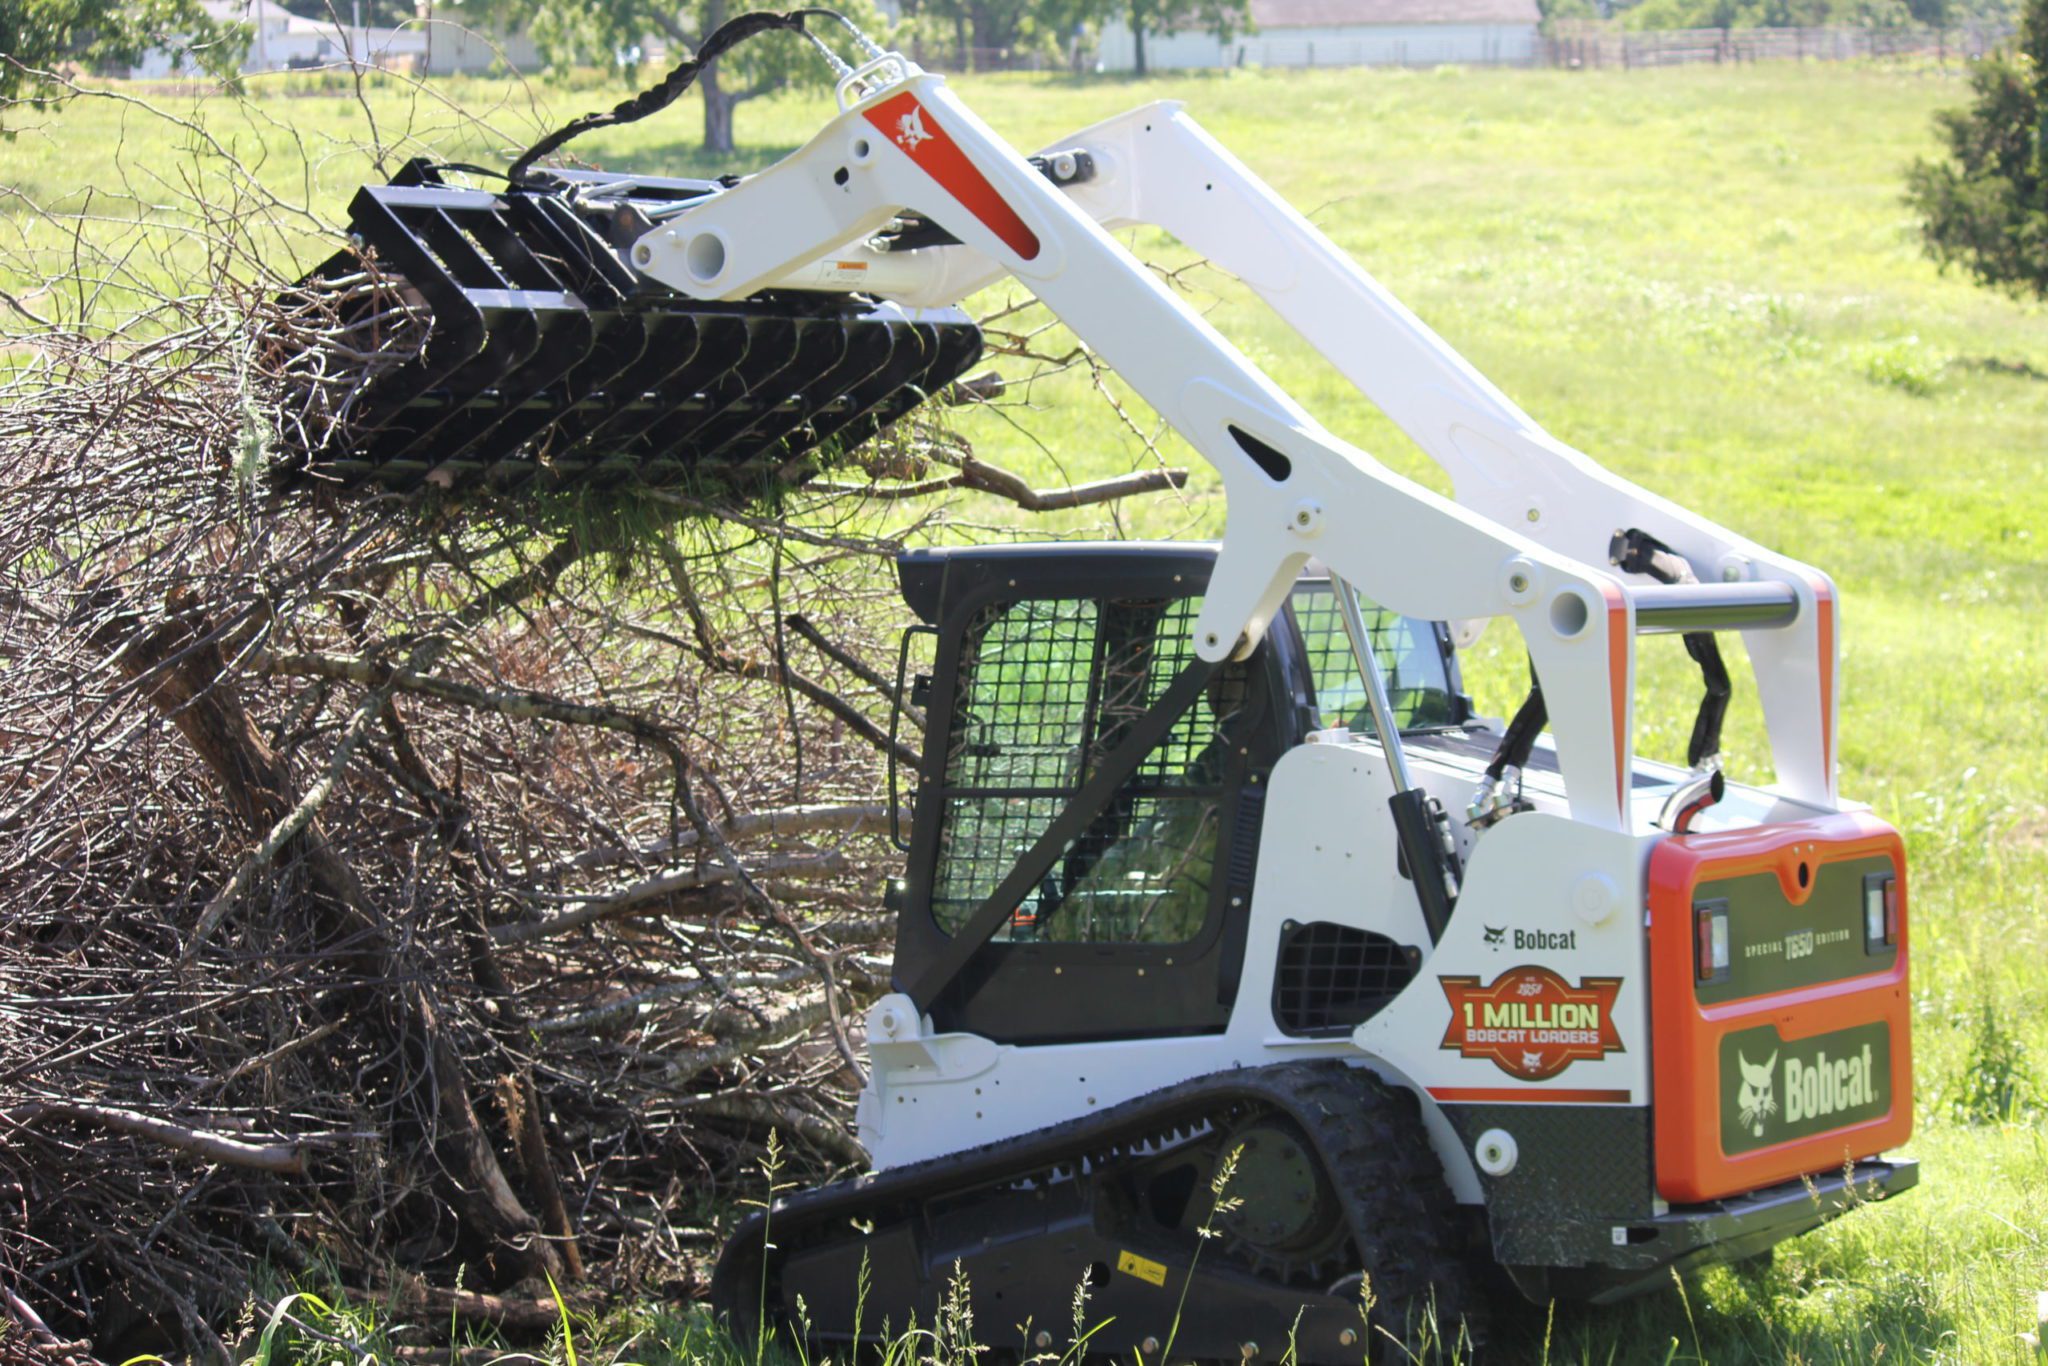 Brushboss Grapple lifting a limbs and sticks and other debris